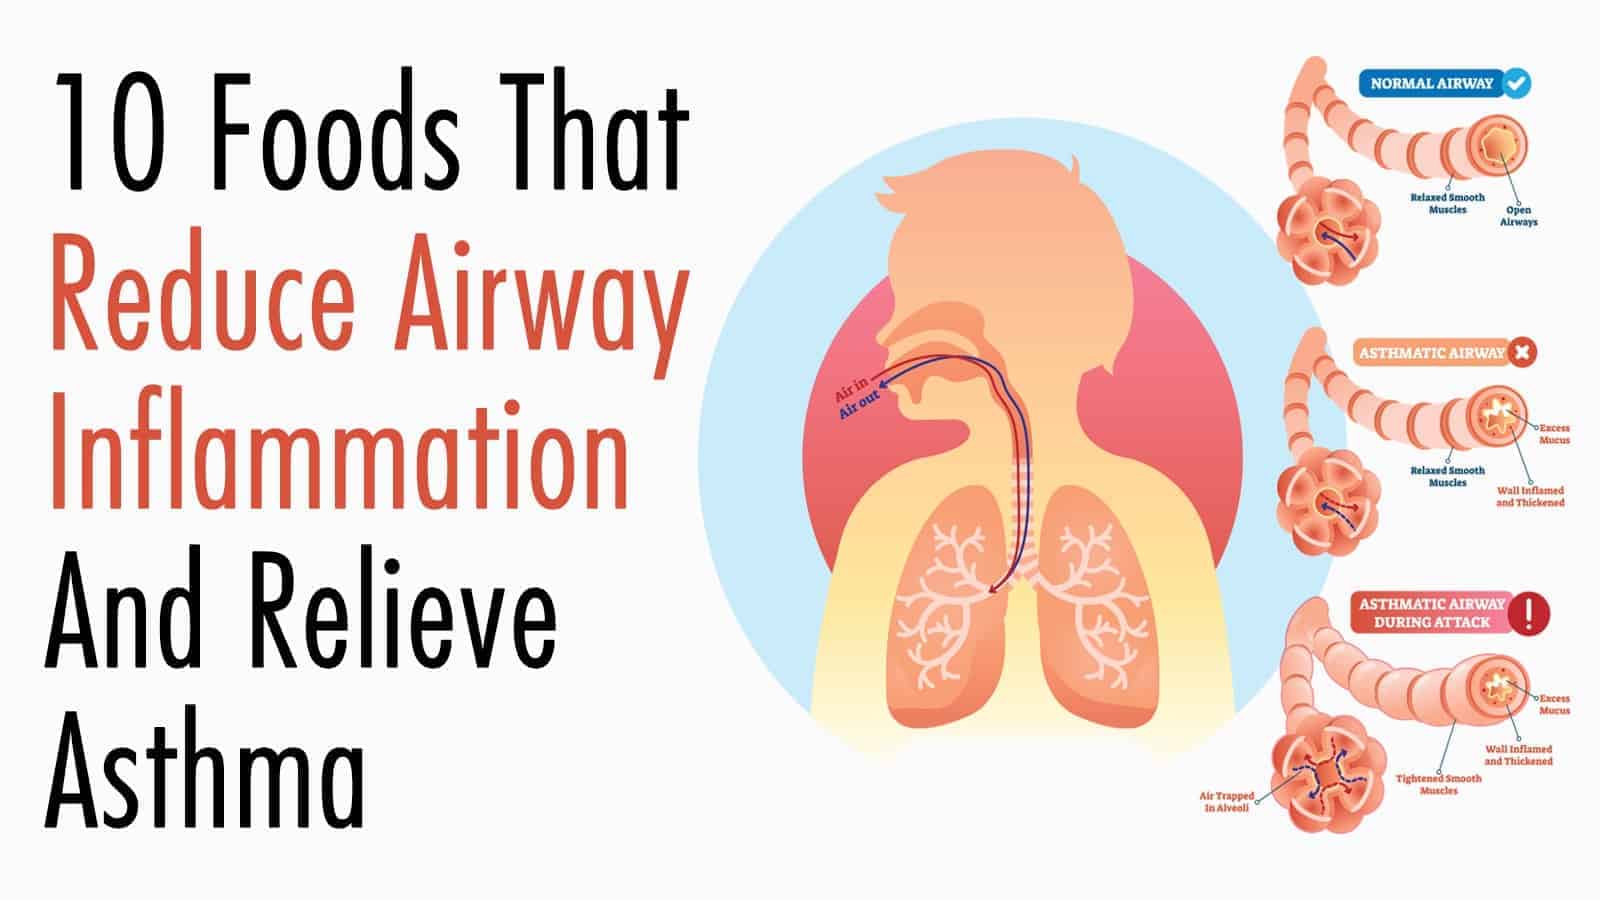 10 Foods That Reduce Airway Inflammation And Relieve Asthma